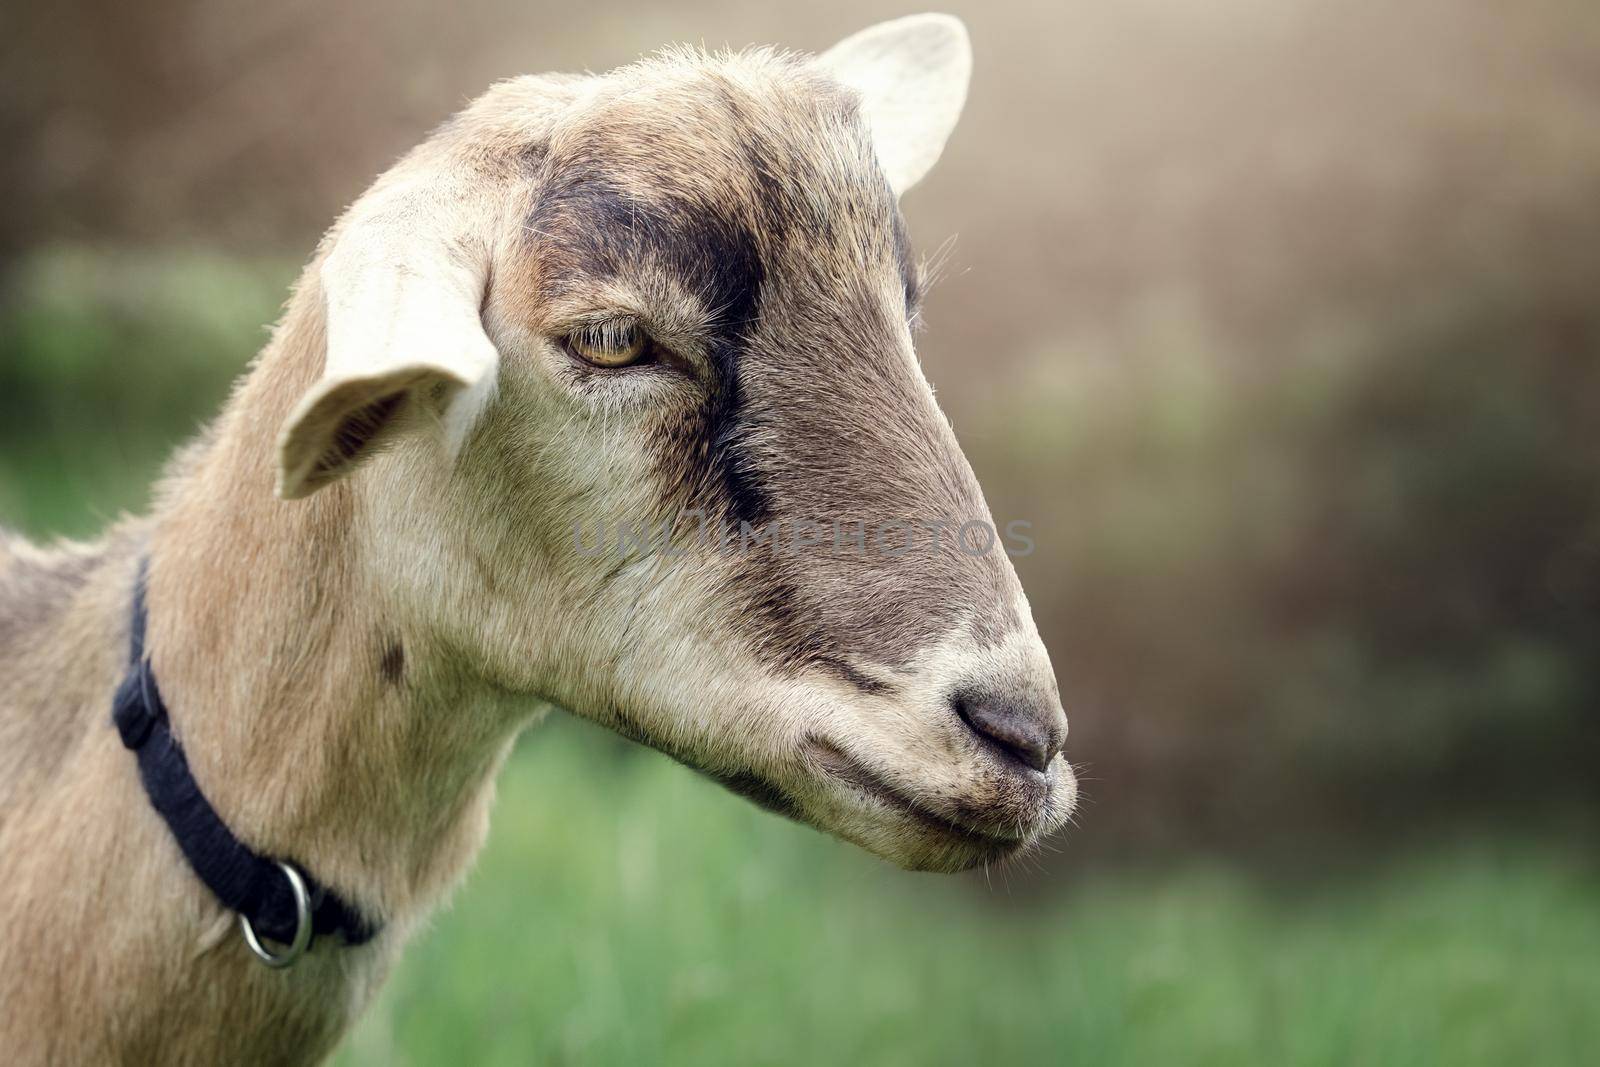 Detailed portrait of a goat's head in close-up in a beautiful blurred nature background.